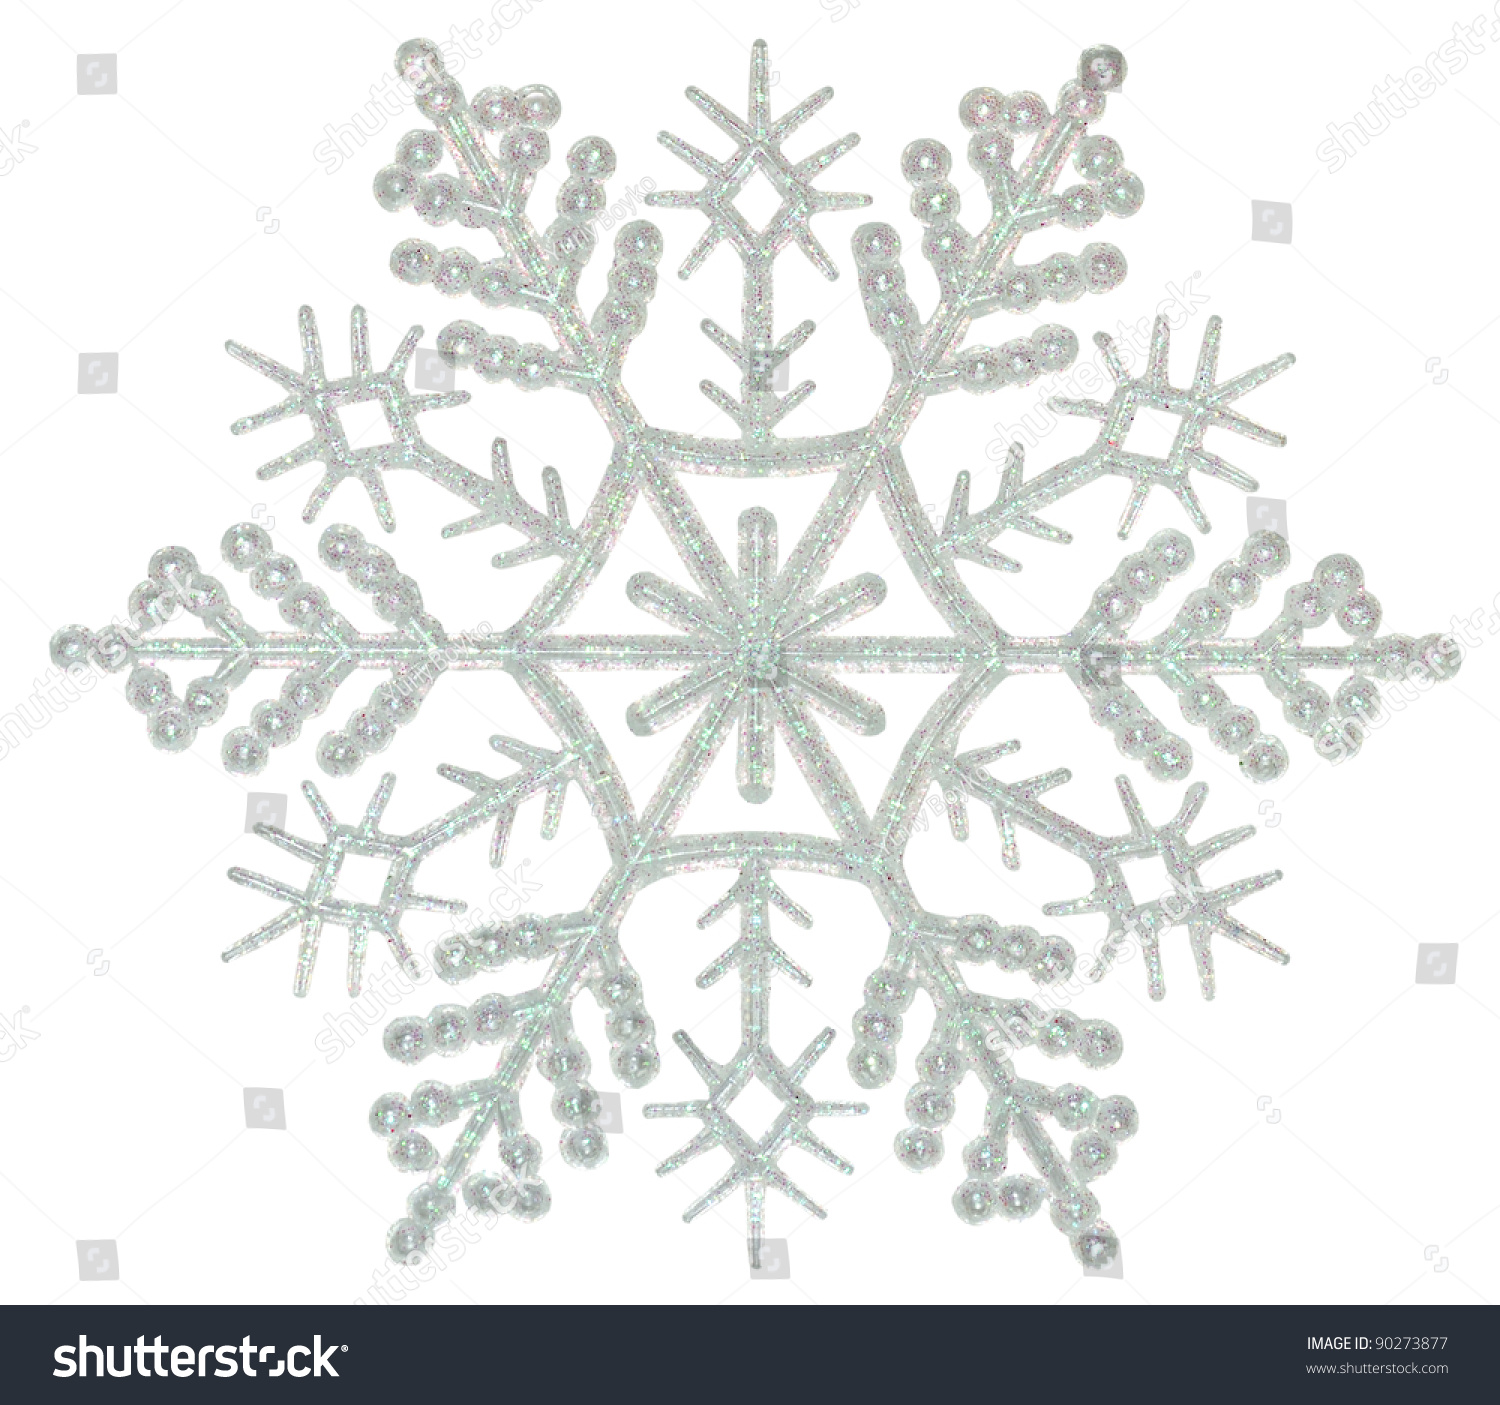 Snowflake On A White Background Stock Photo 90273877 : Shutterstock